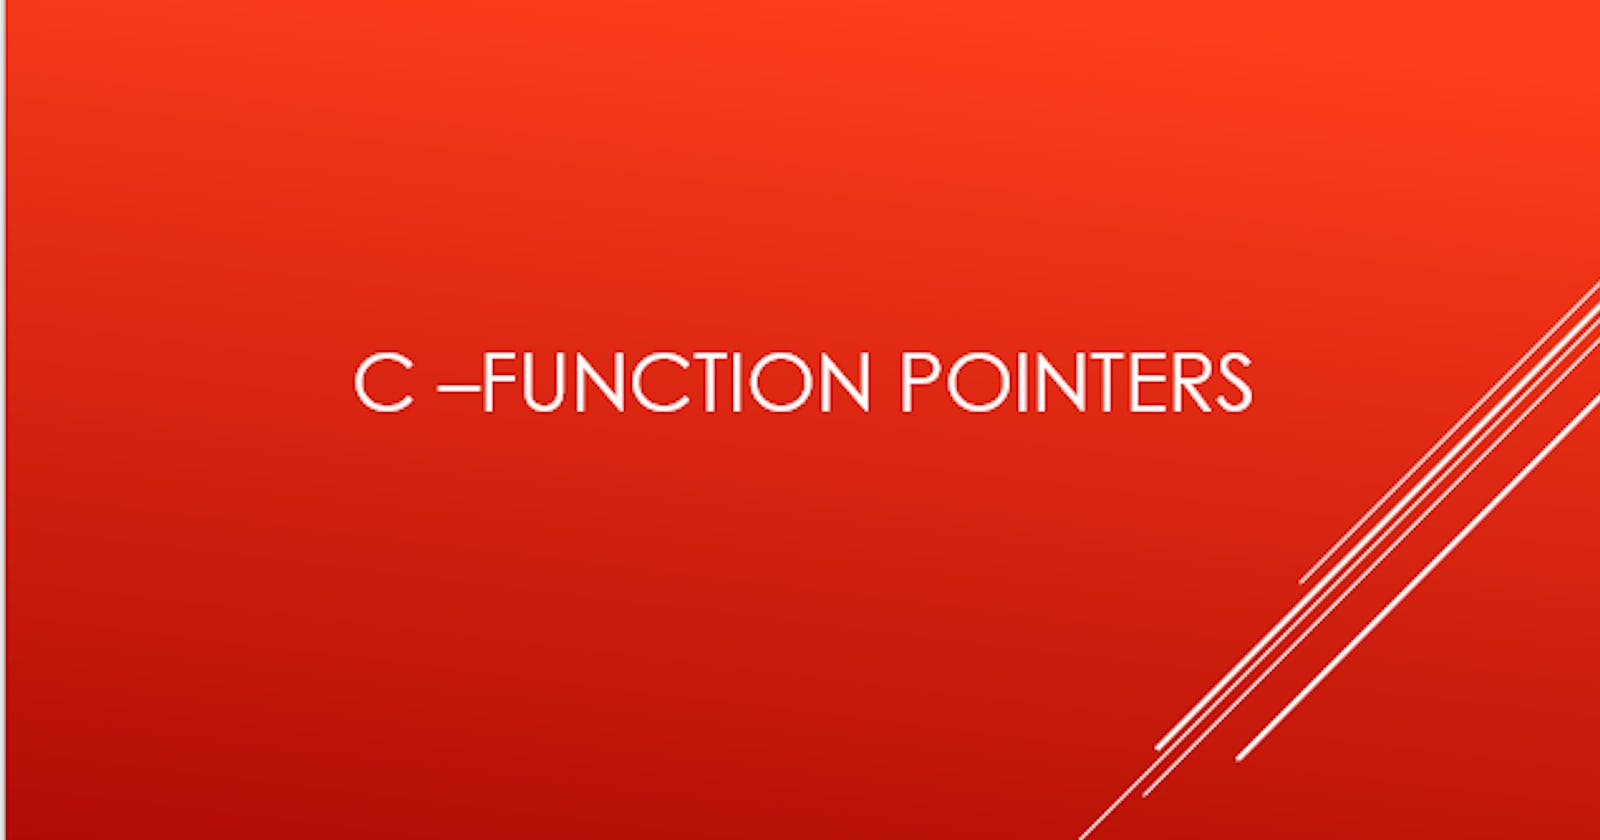 Function Pointers